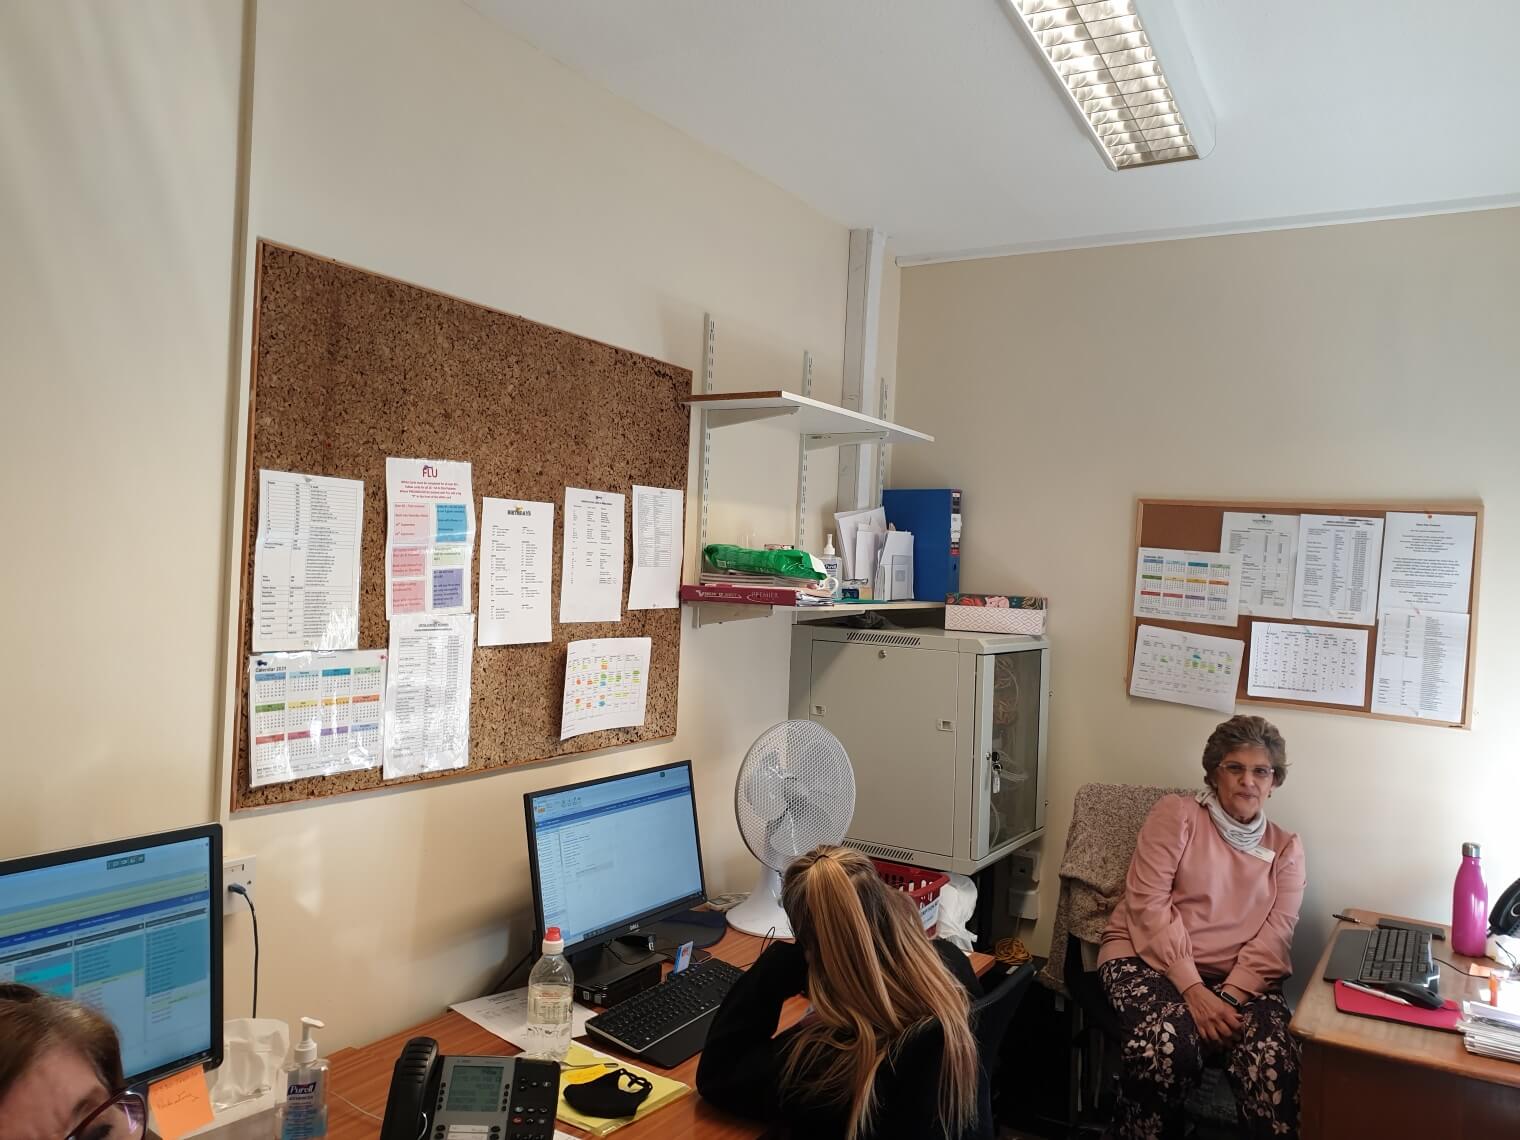 Improving admin area to support NHS staff